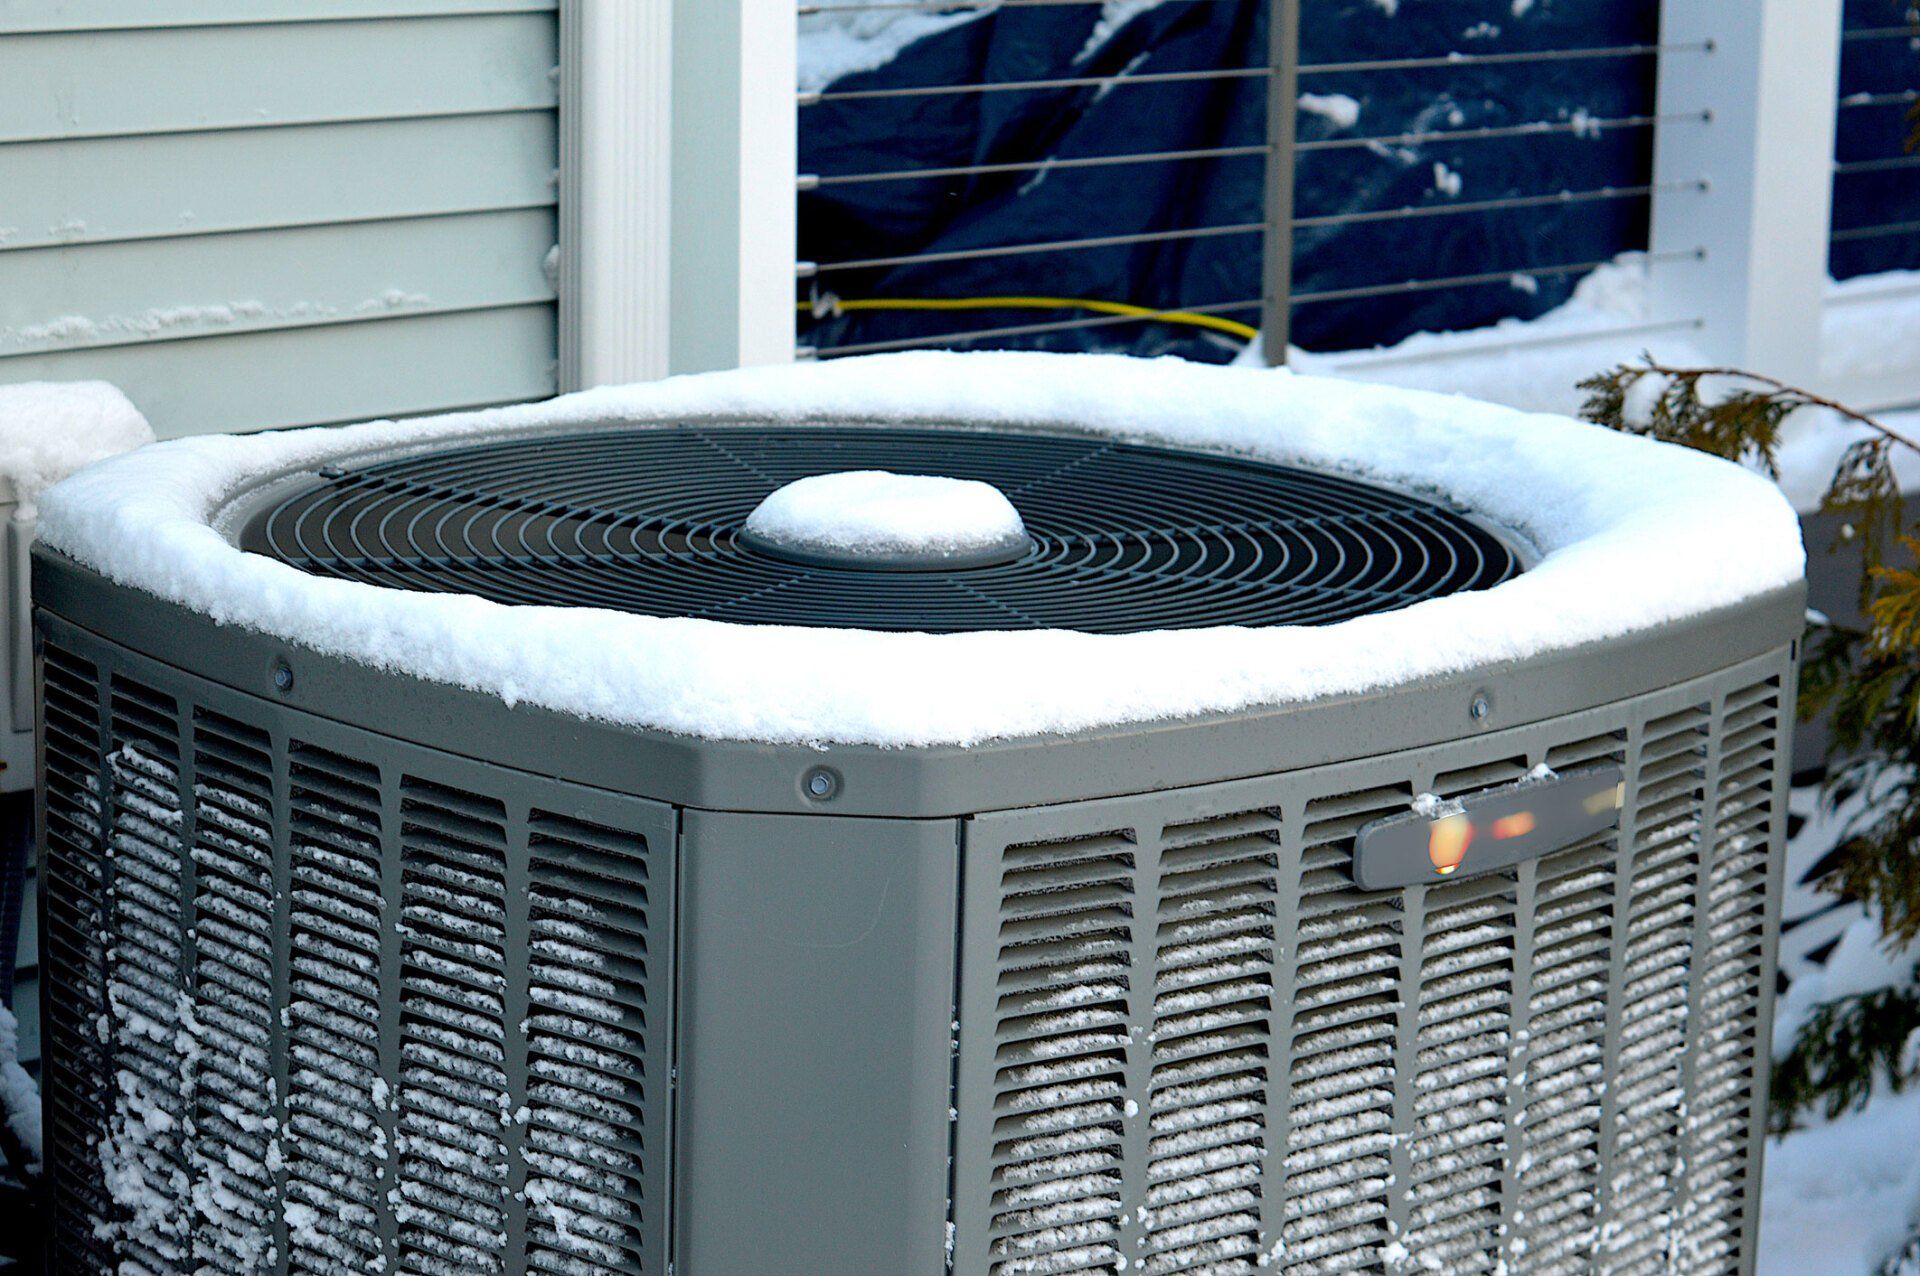 Snow Covered Outdoor AC Unit | Tucson, AZ | Miracle Air Heating & Cooling